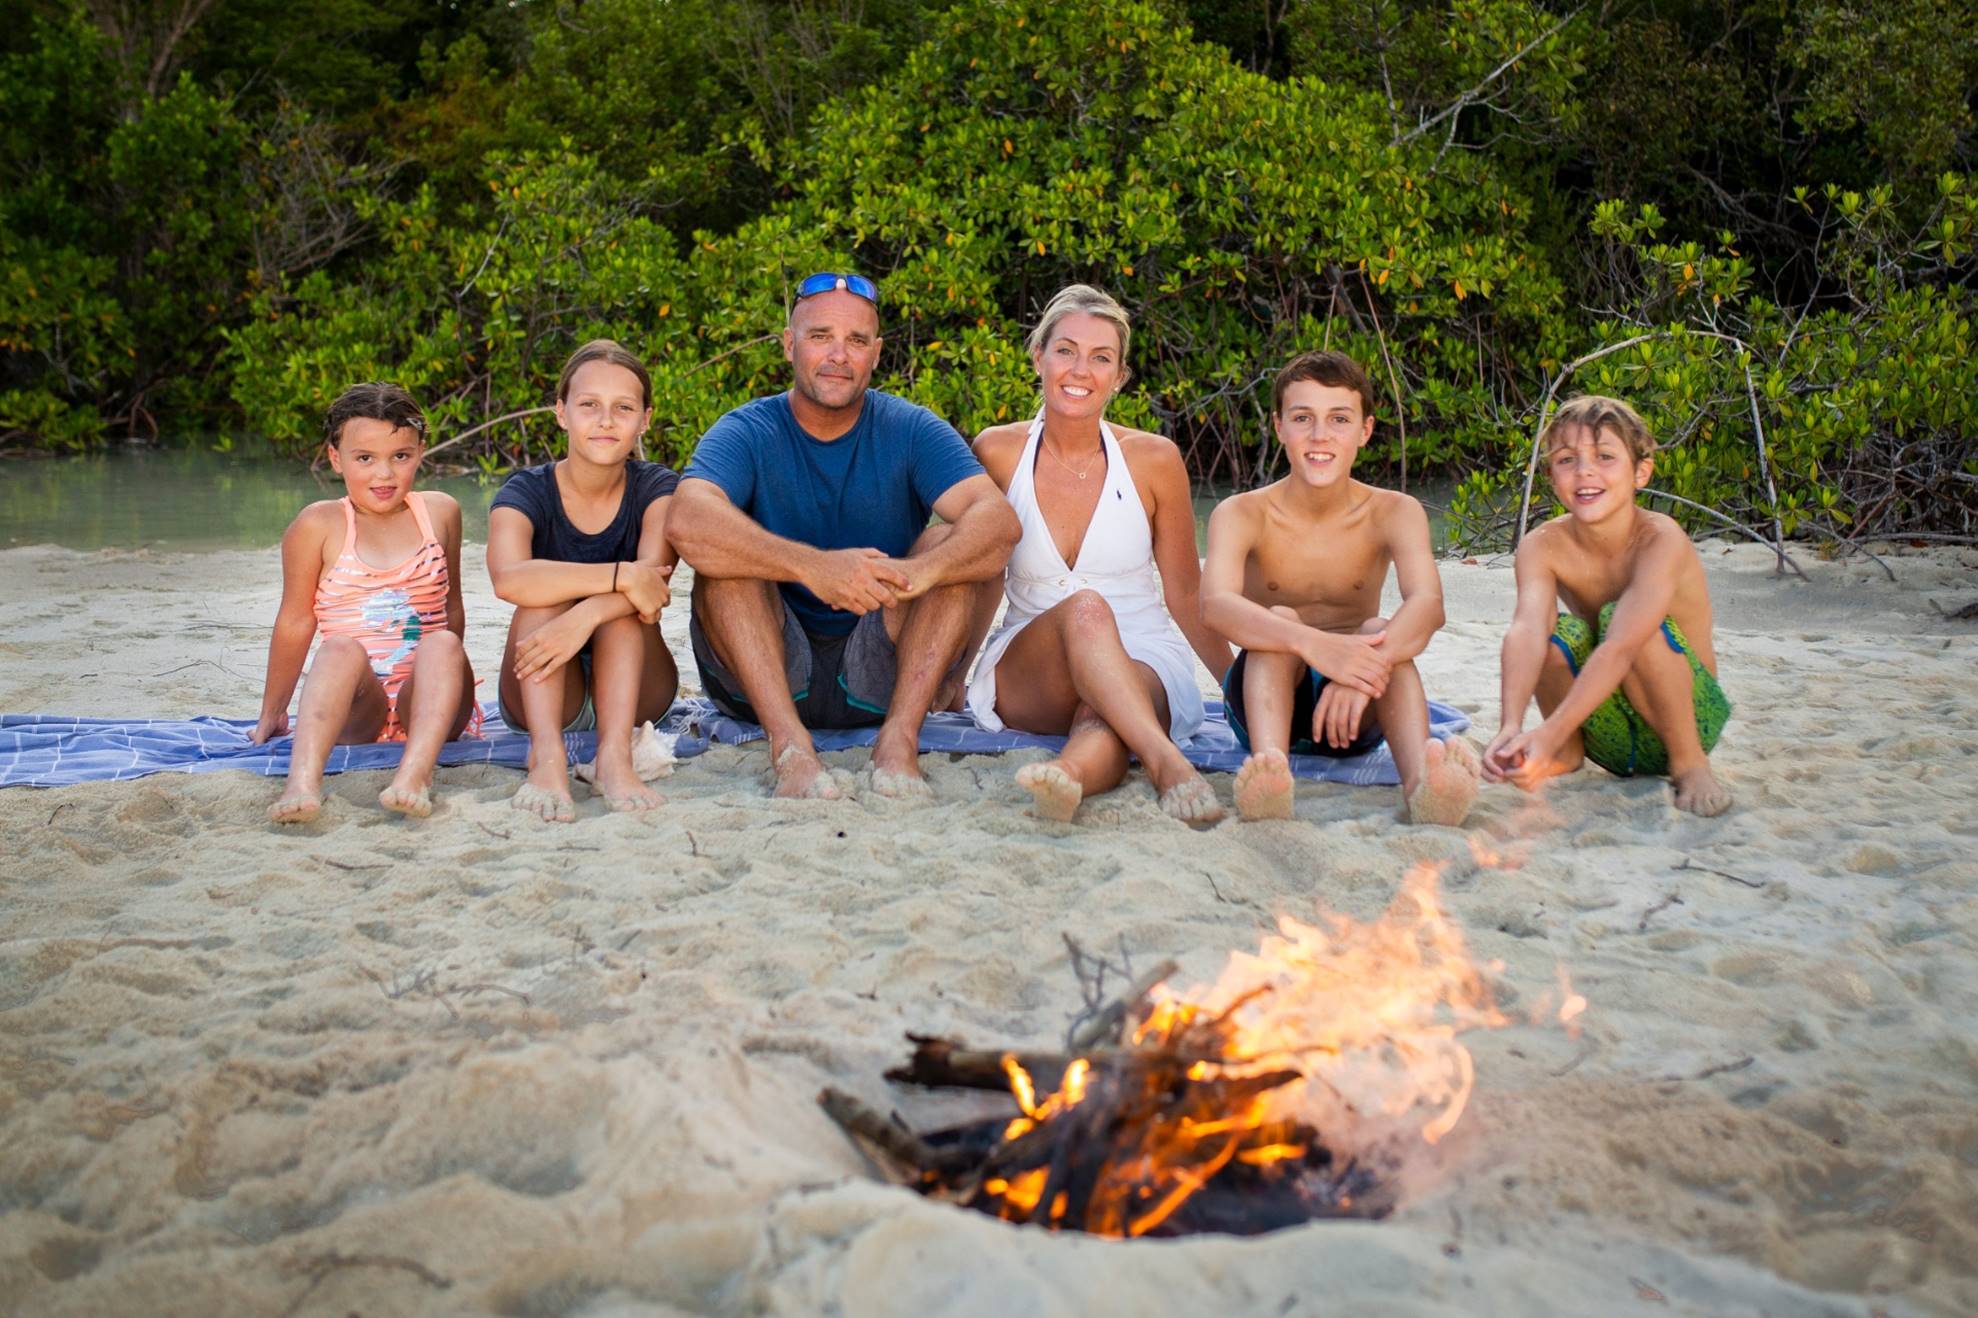 The Baeumler family from HGTV's 'Renovation Island' sitting around a campfire on the beach 